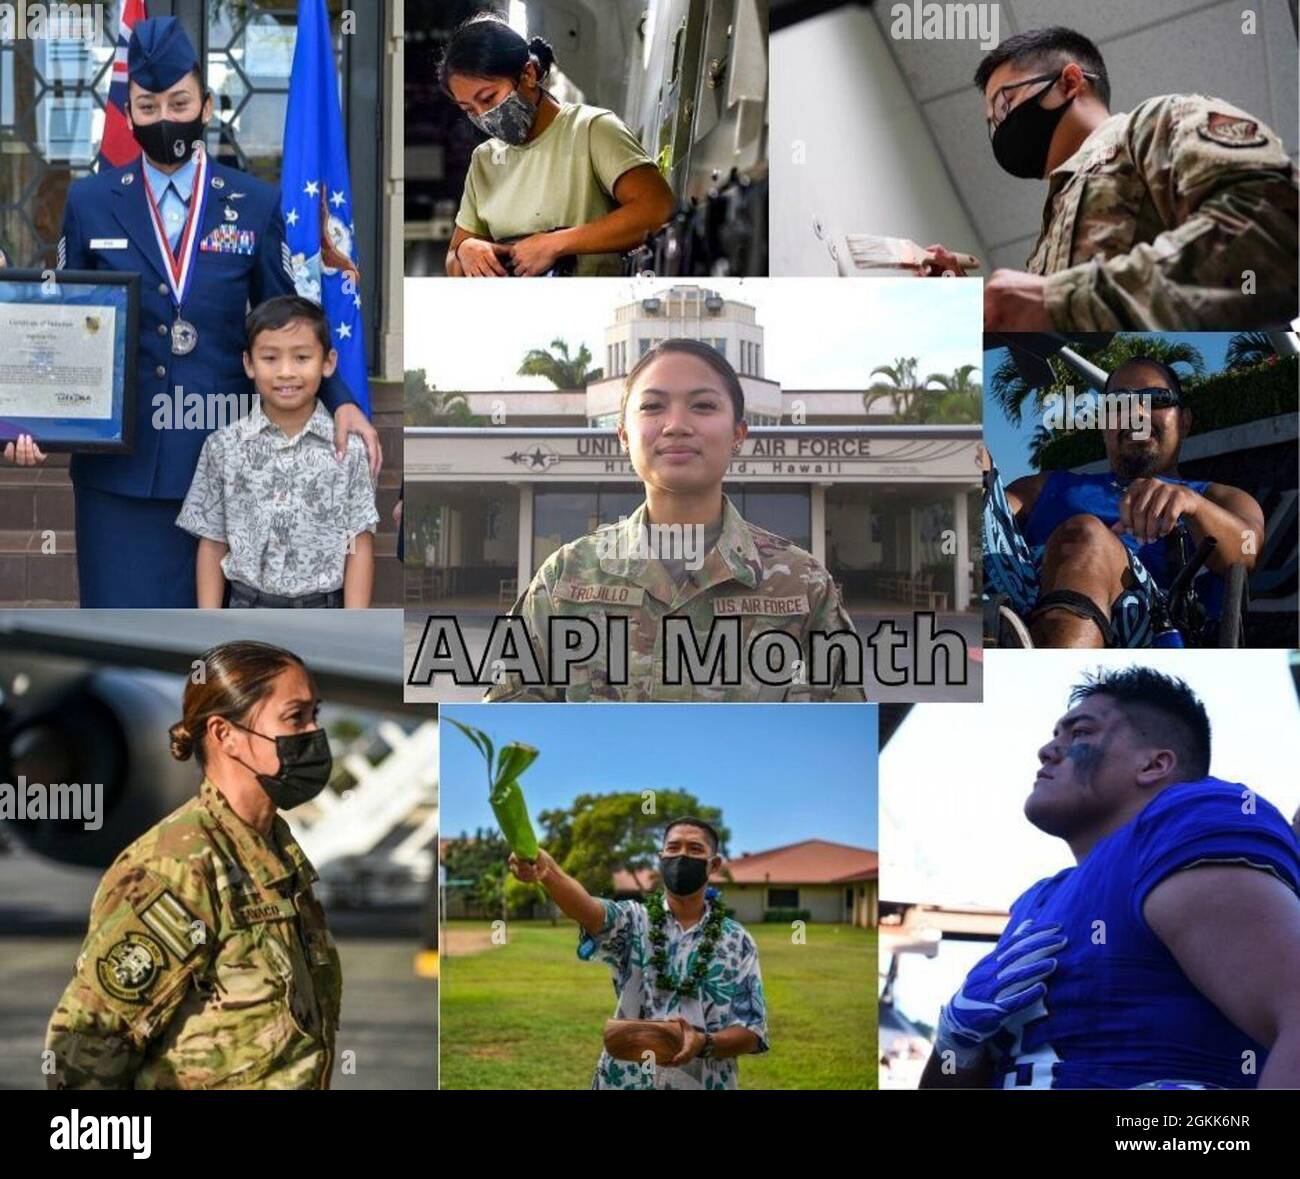 The 15th Wing celebrates Asian American Pacific Islander Heritage Month by highlighting its AAPI members at Joint Base Pearl Harbor-Hickam, Hawaii, May 12, 2021. Since 1977, the month of May has been designated to recognize the achievements and contributions to the American story by Asian Americans and Pacific Islanders. Stock Photo